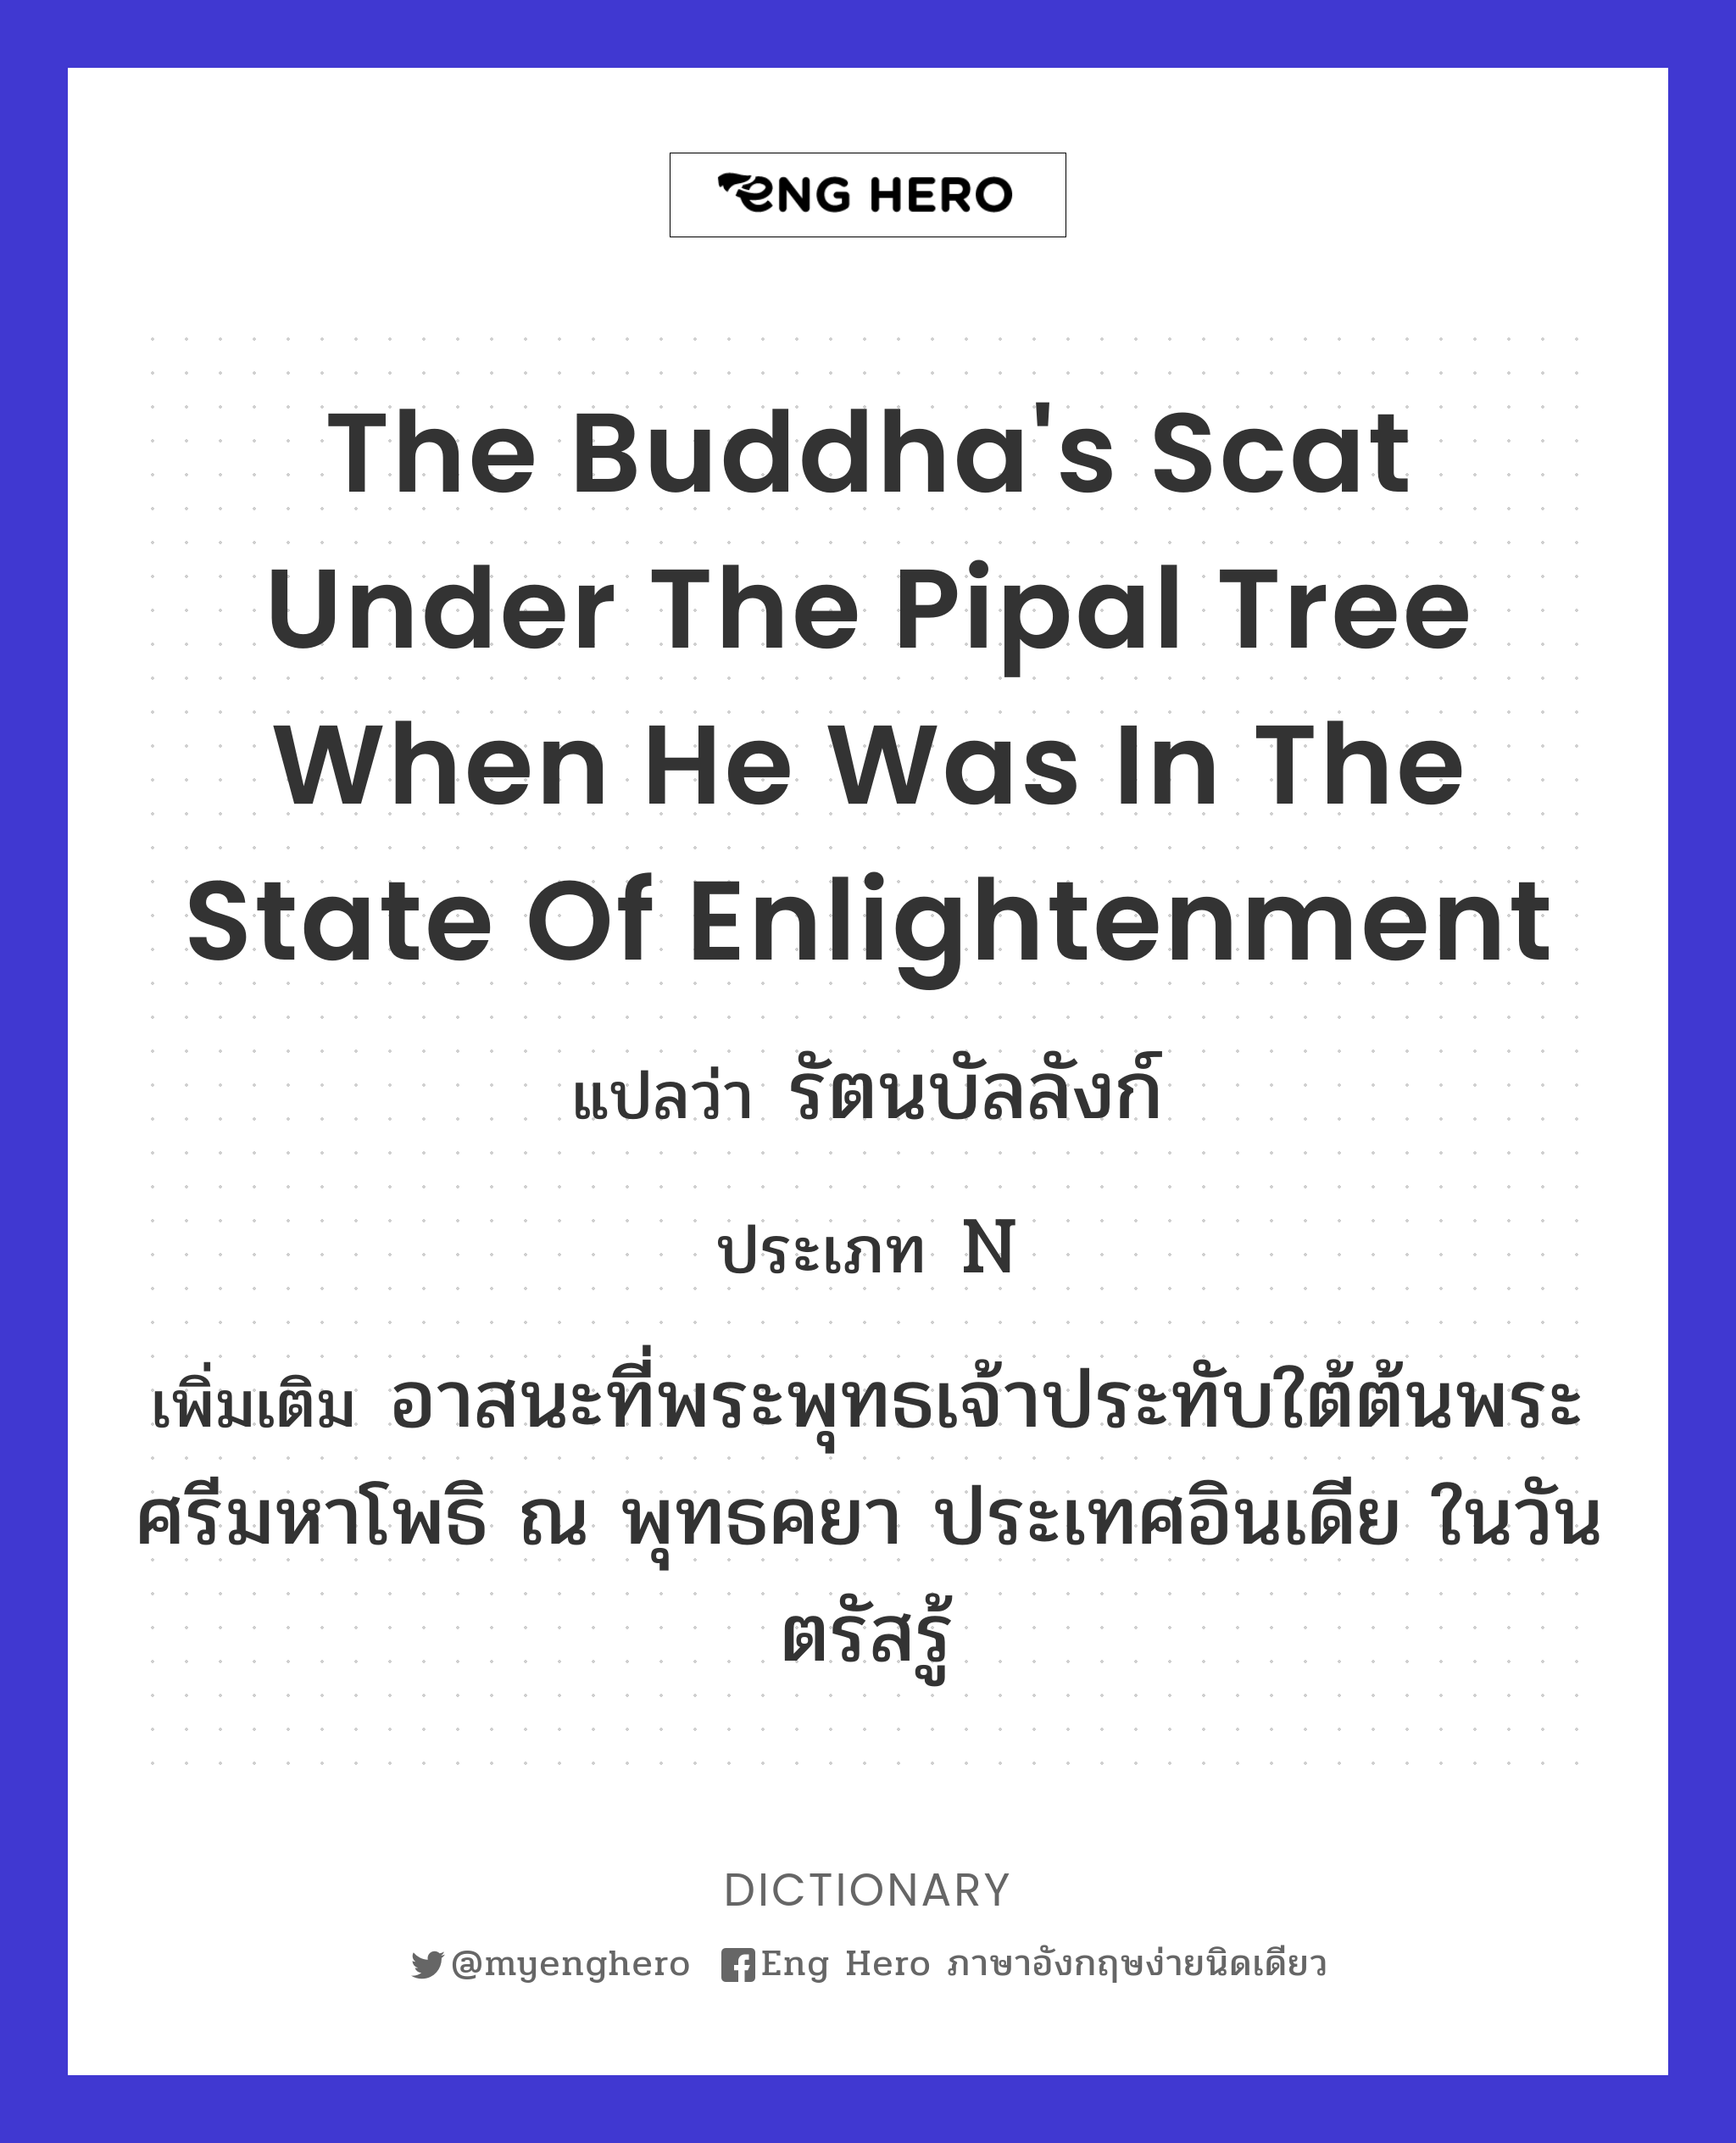 the Buddha's scat under the pipal tree when he was in the state of enlightenment